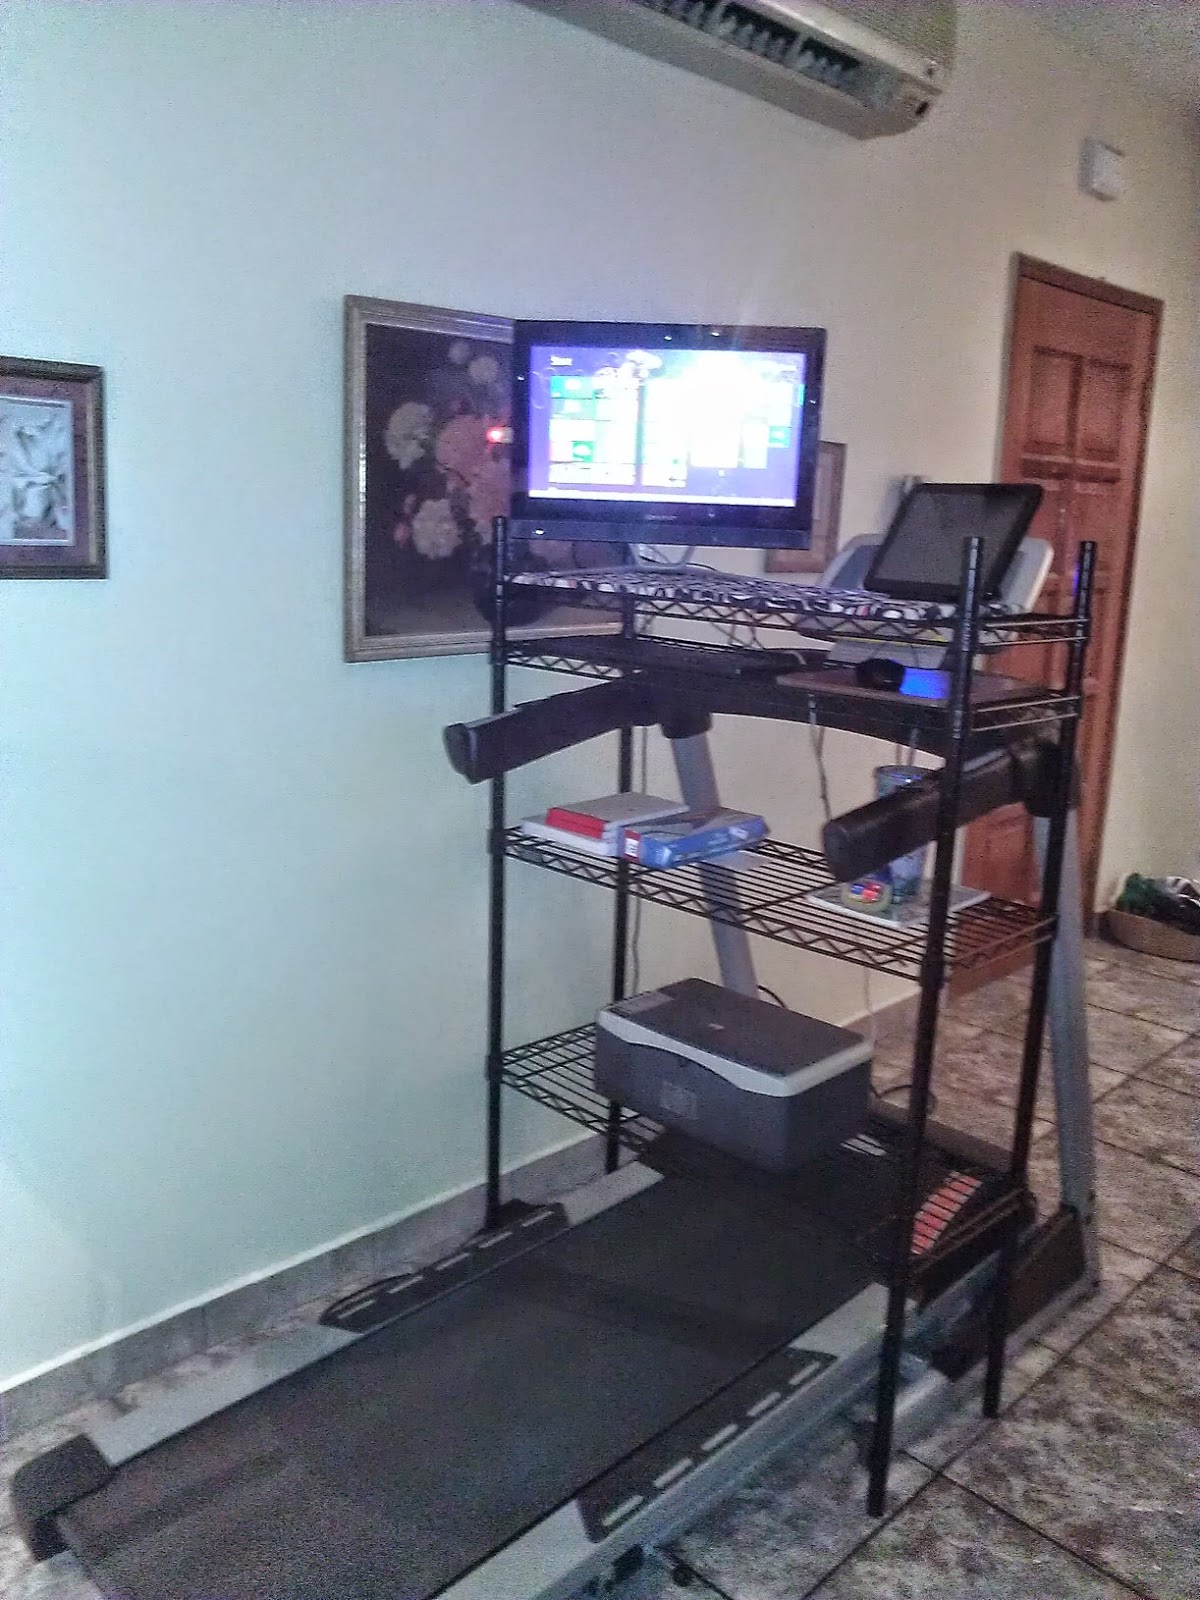 Treadmill Desk Day To Day In Belize